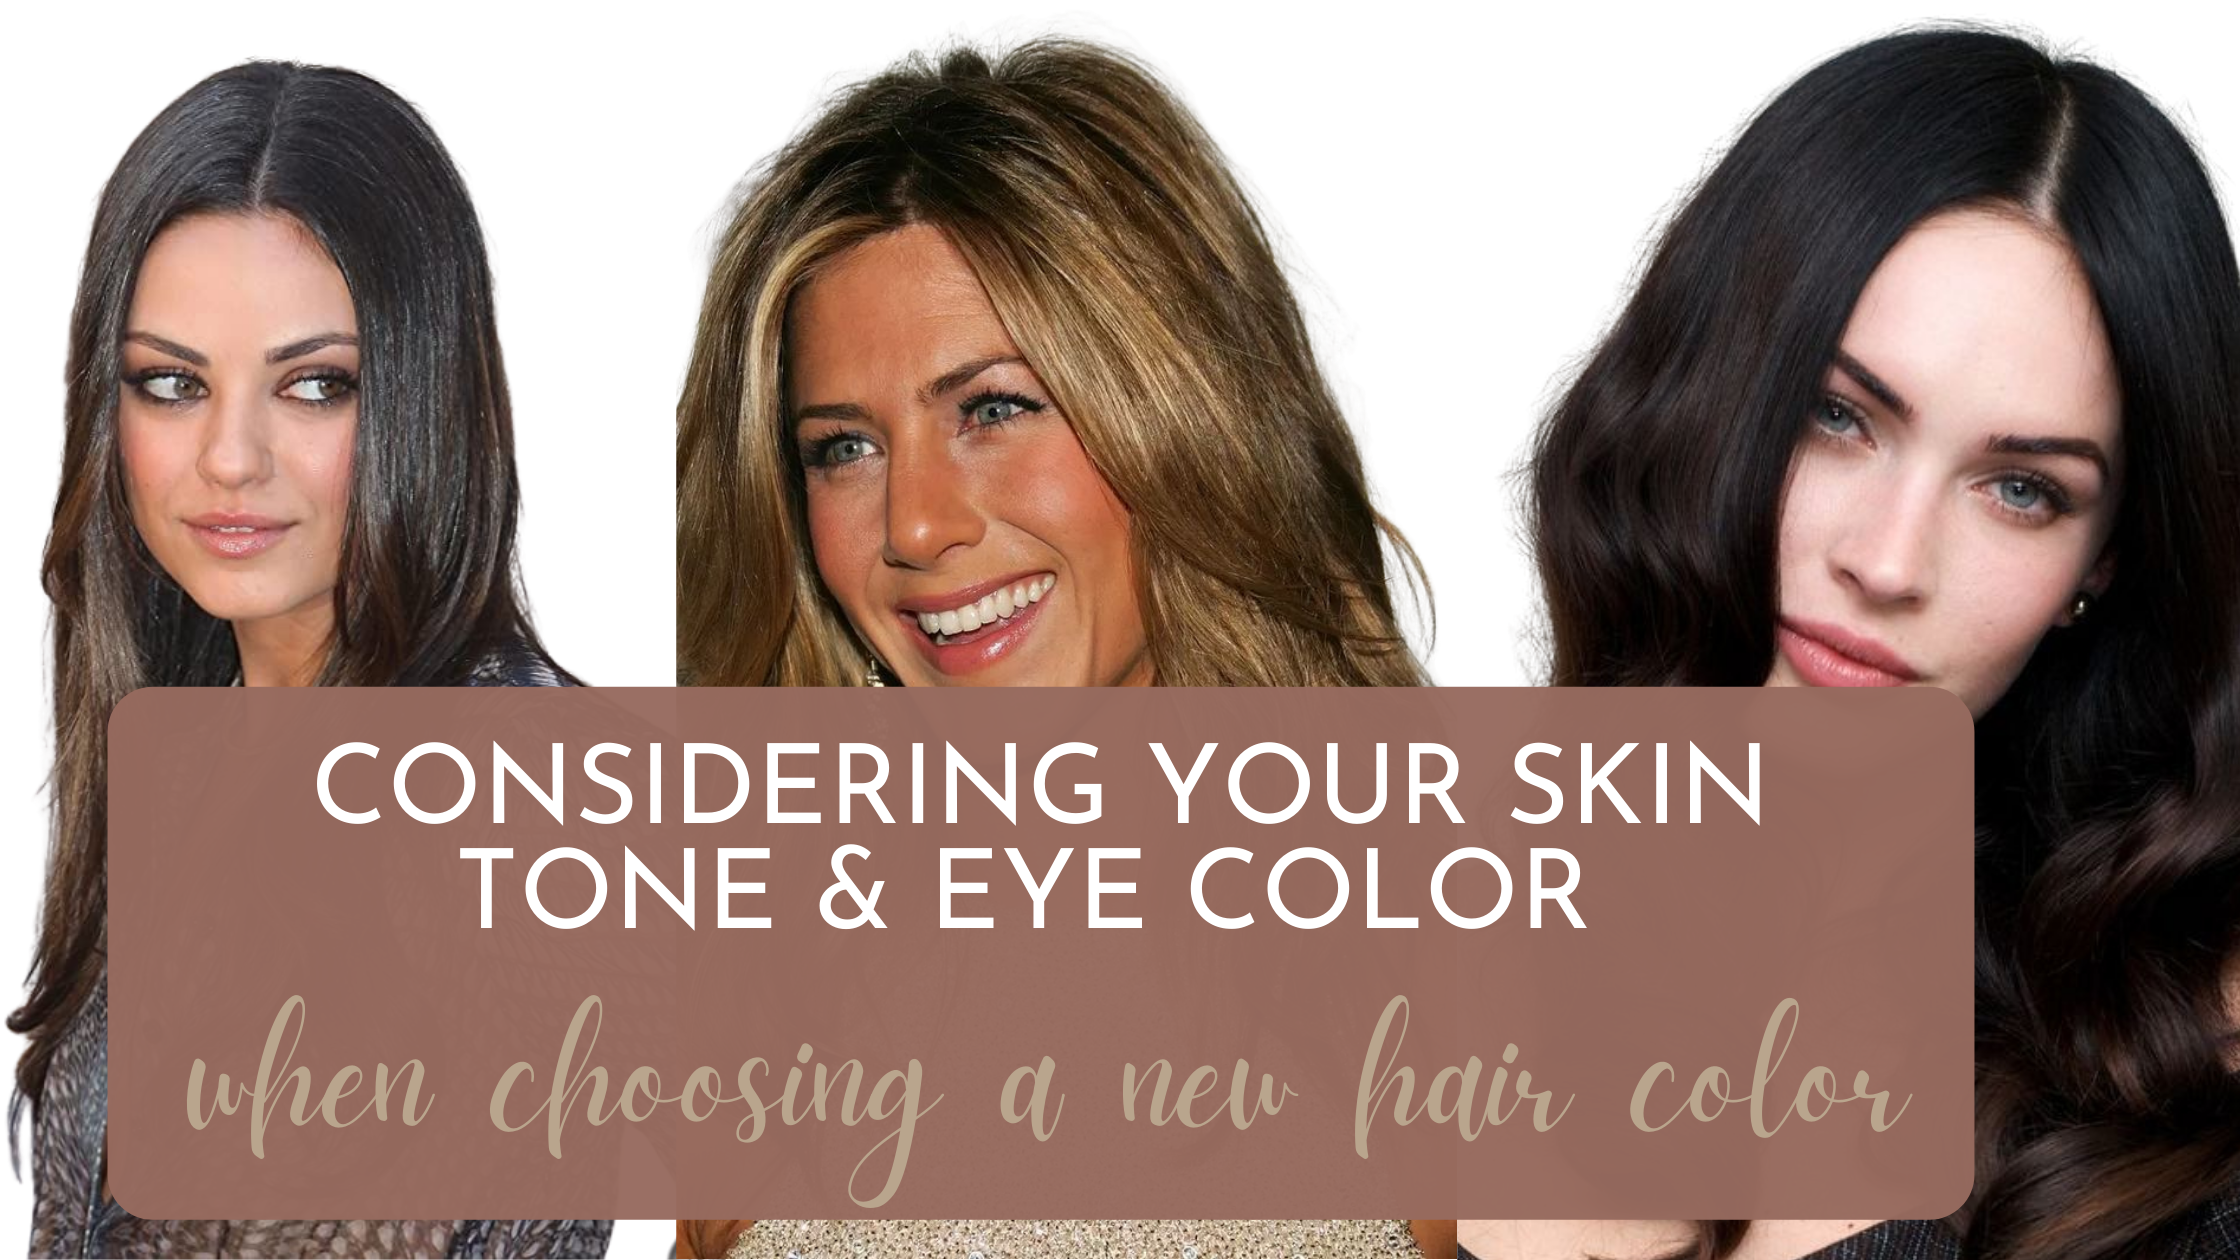 The 10 Best Hair Colors For Warm Skin Tones Right Now.